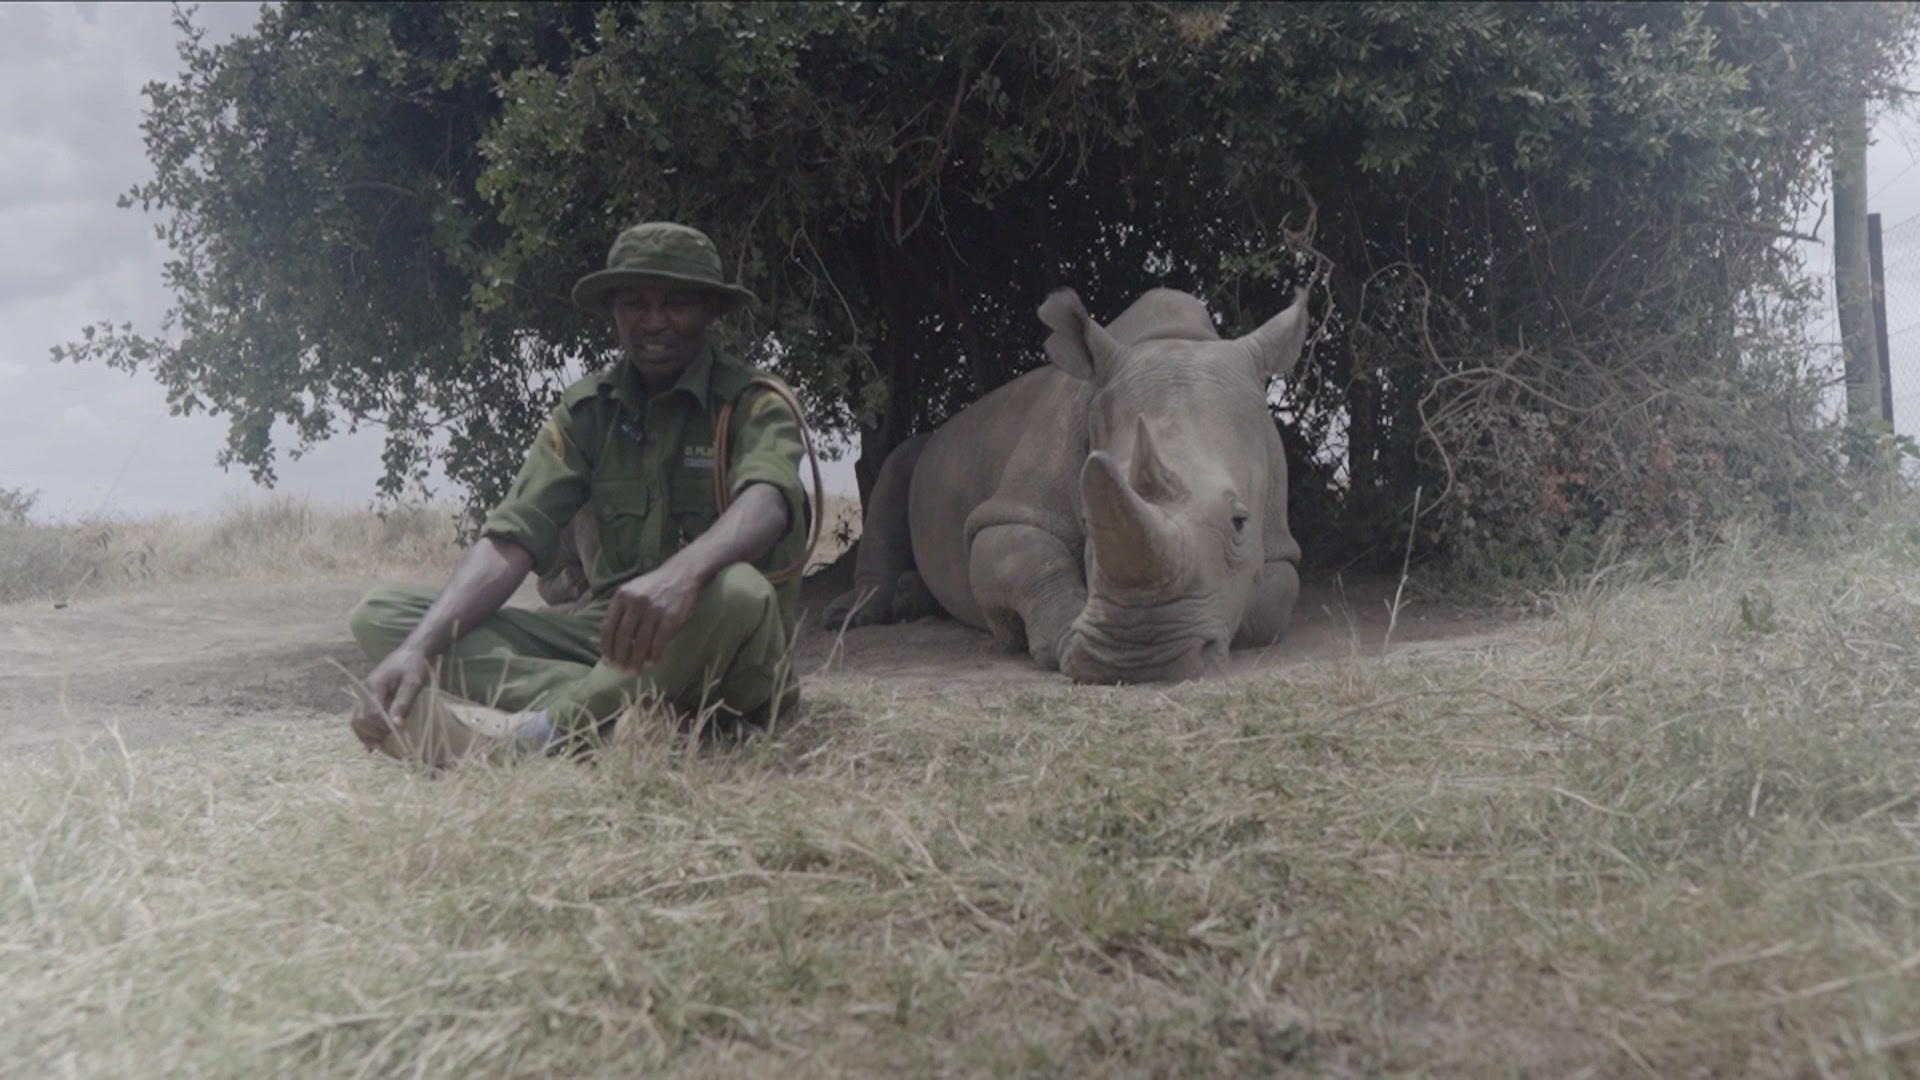 Rhino lets out a huge fart during documentary filming. Shake in the middle of the interview!